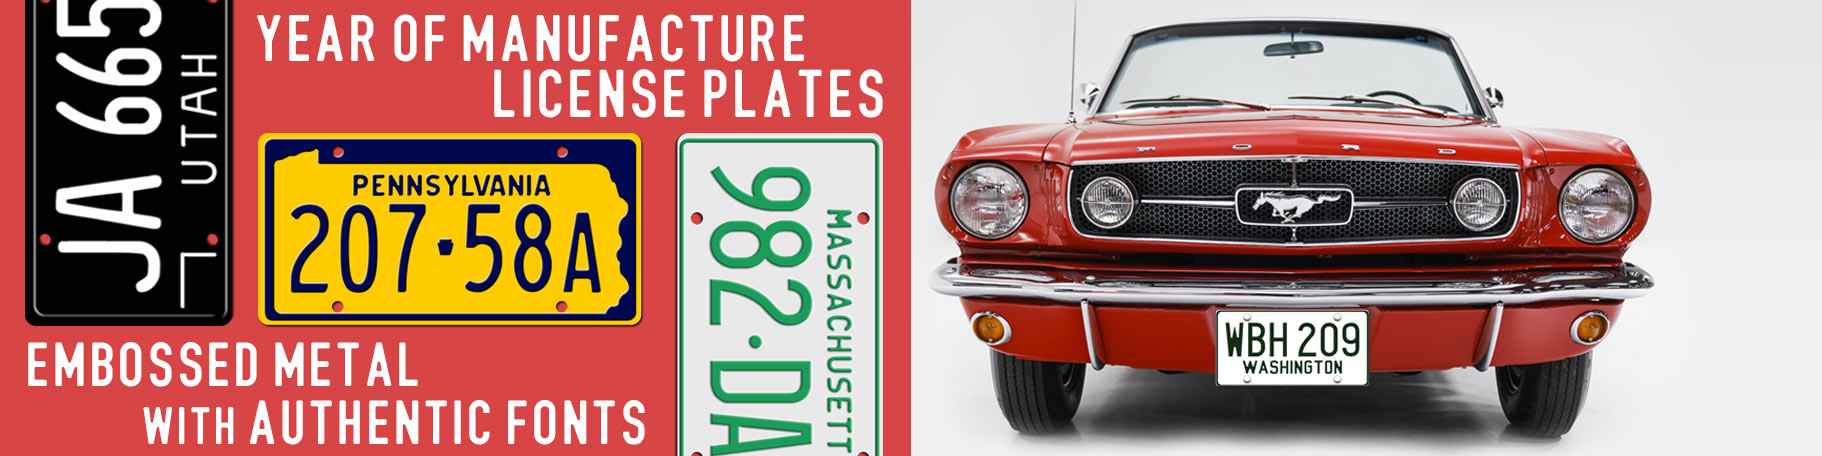 Custom license plates - personalized plates for your collector car, vintage automobile, or hot rod